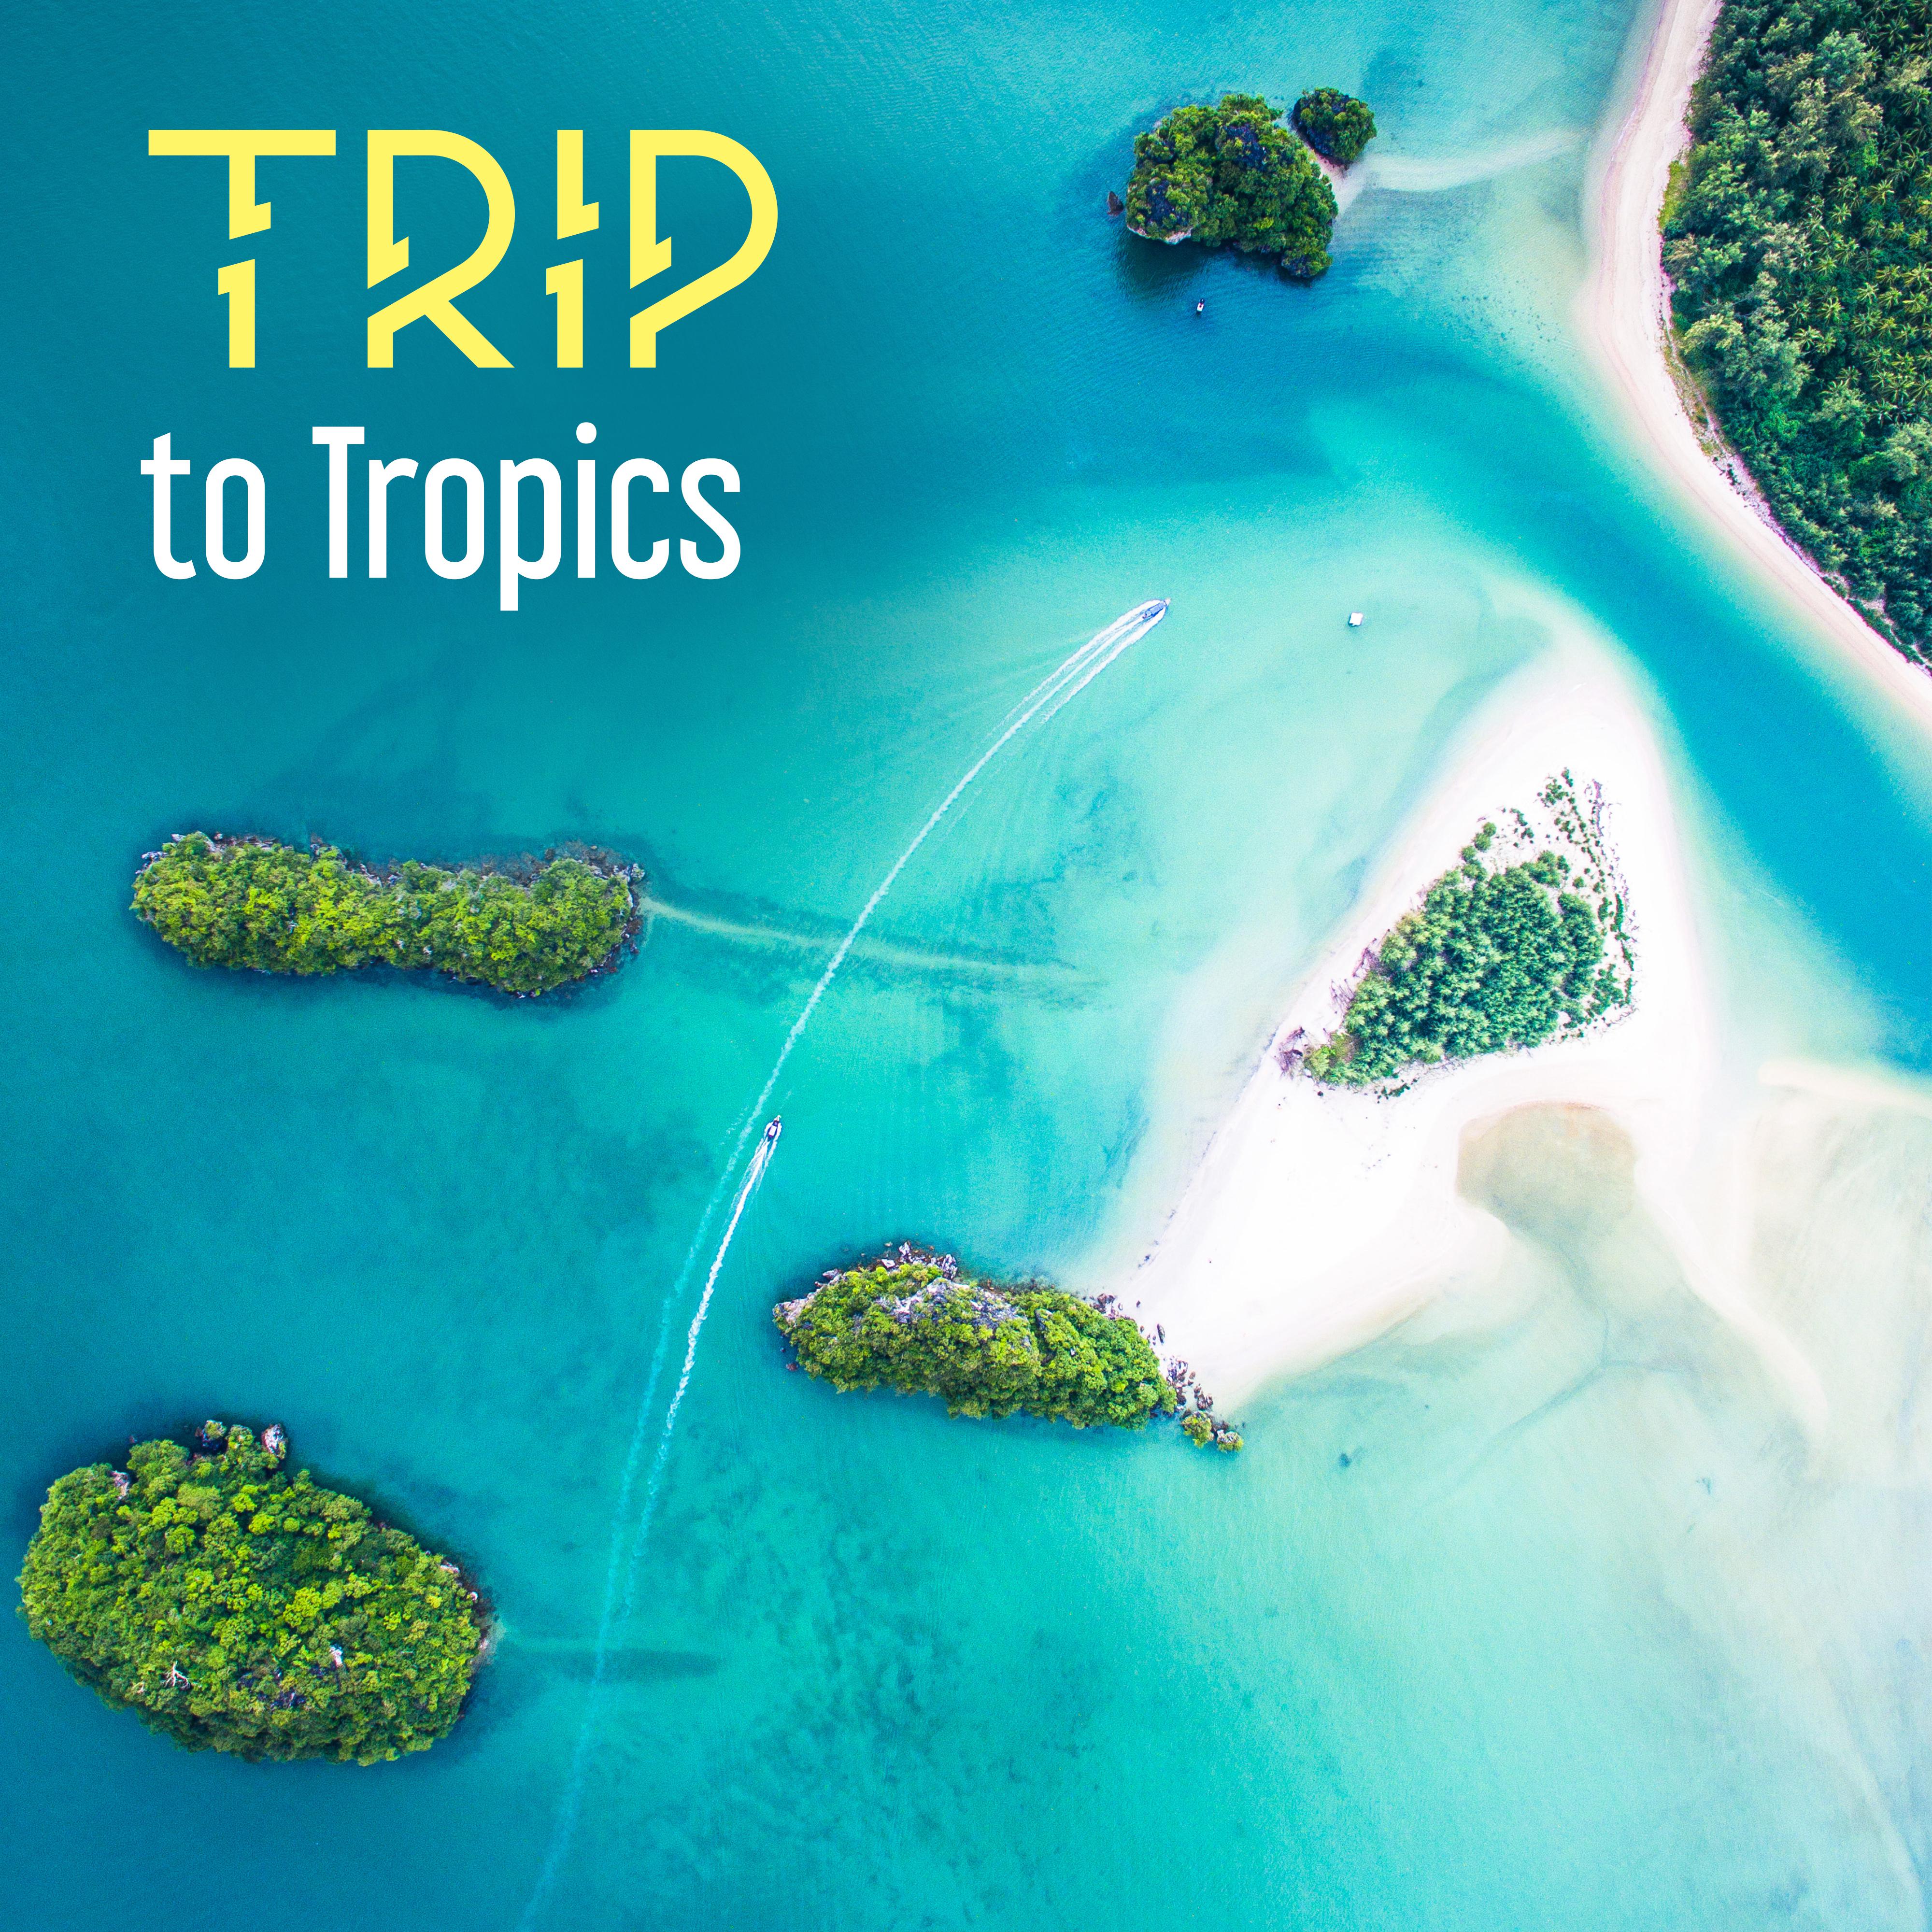 Trip to Tropics – Holiday Chill Out Music, Summertime, Sun, Beach, Sand, Relax Under Palms, Relaxation, Tropical Lounge